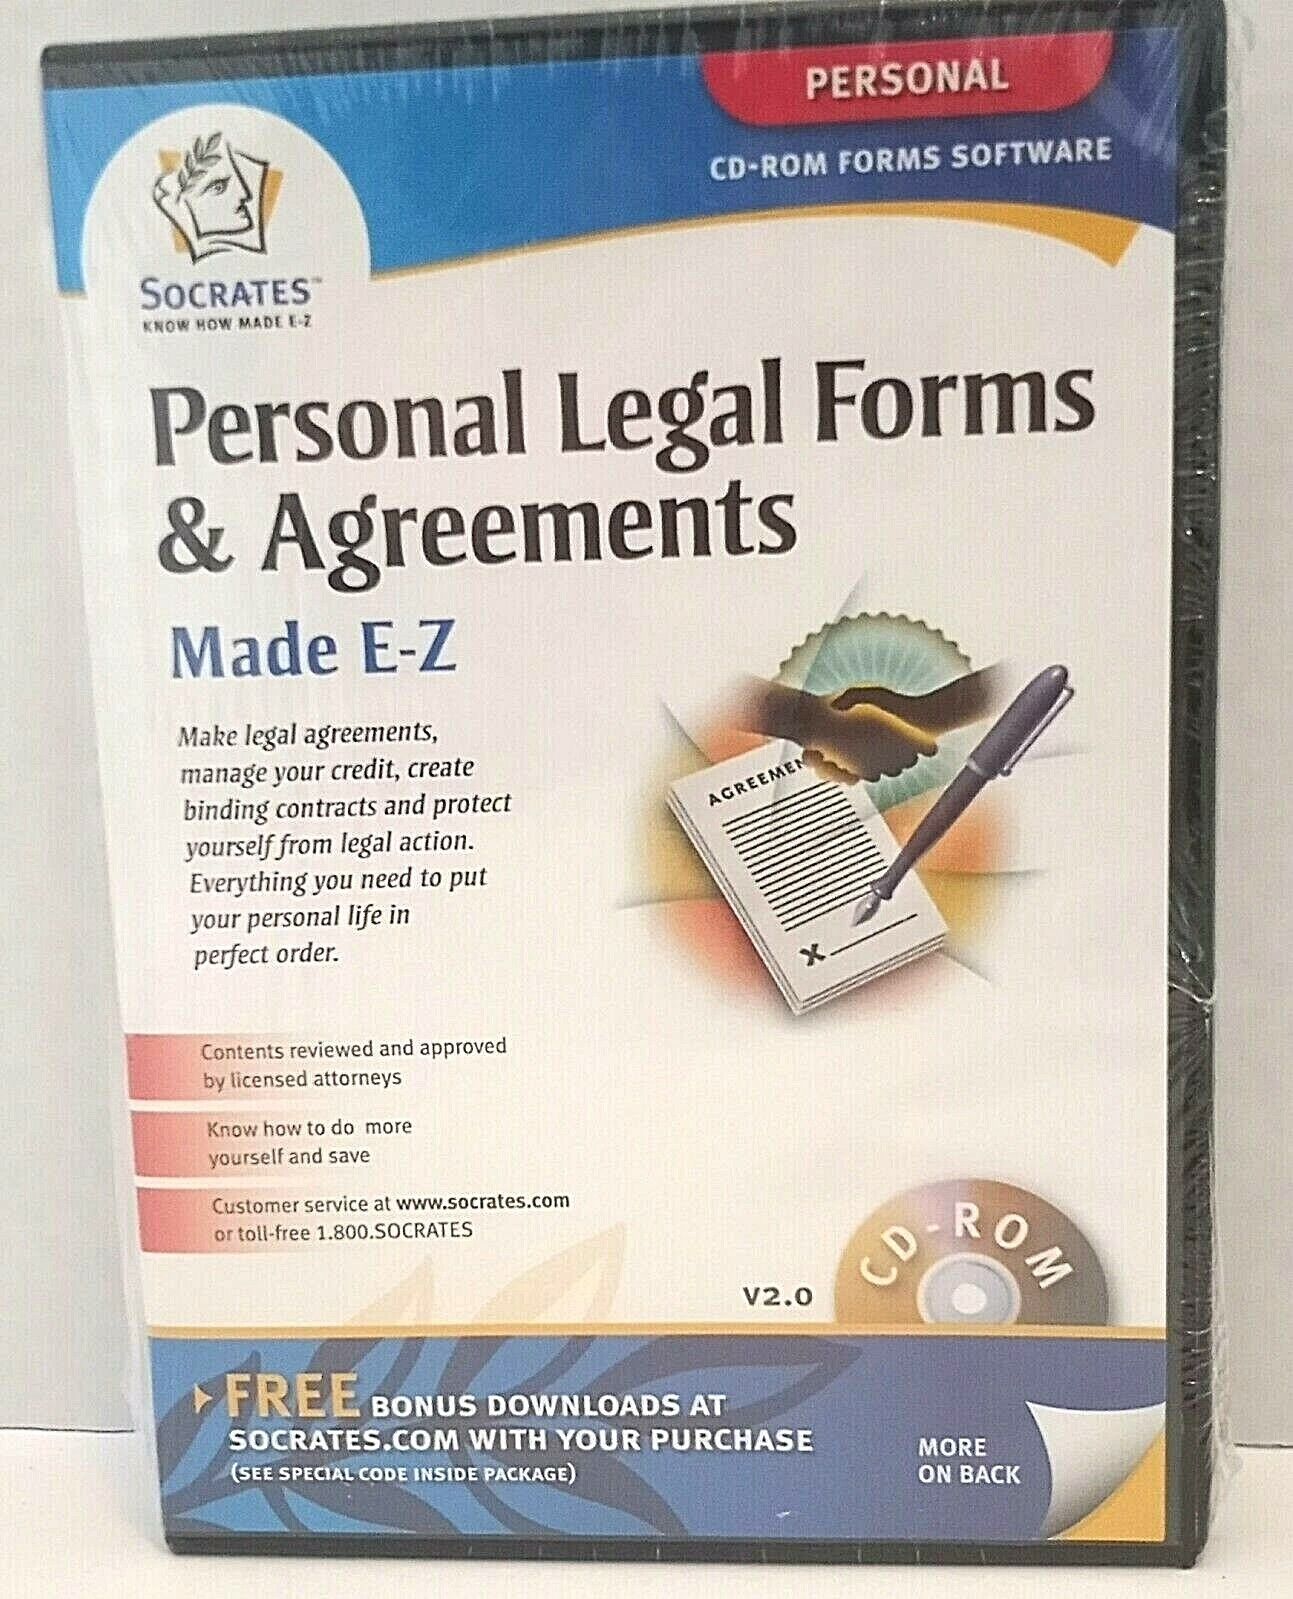 SOCRATES Personal Legal Forms Agreements on CD-ROM V2.0 Attorney Approved! NEW